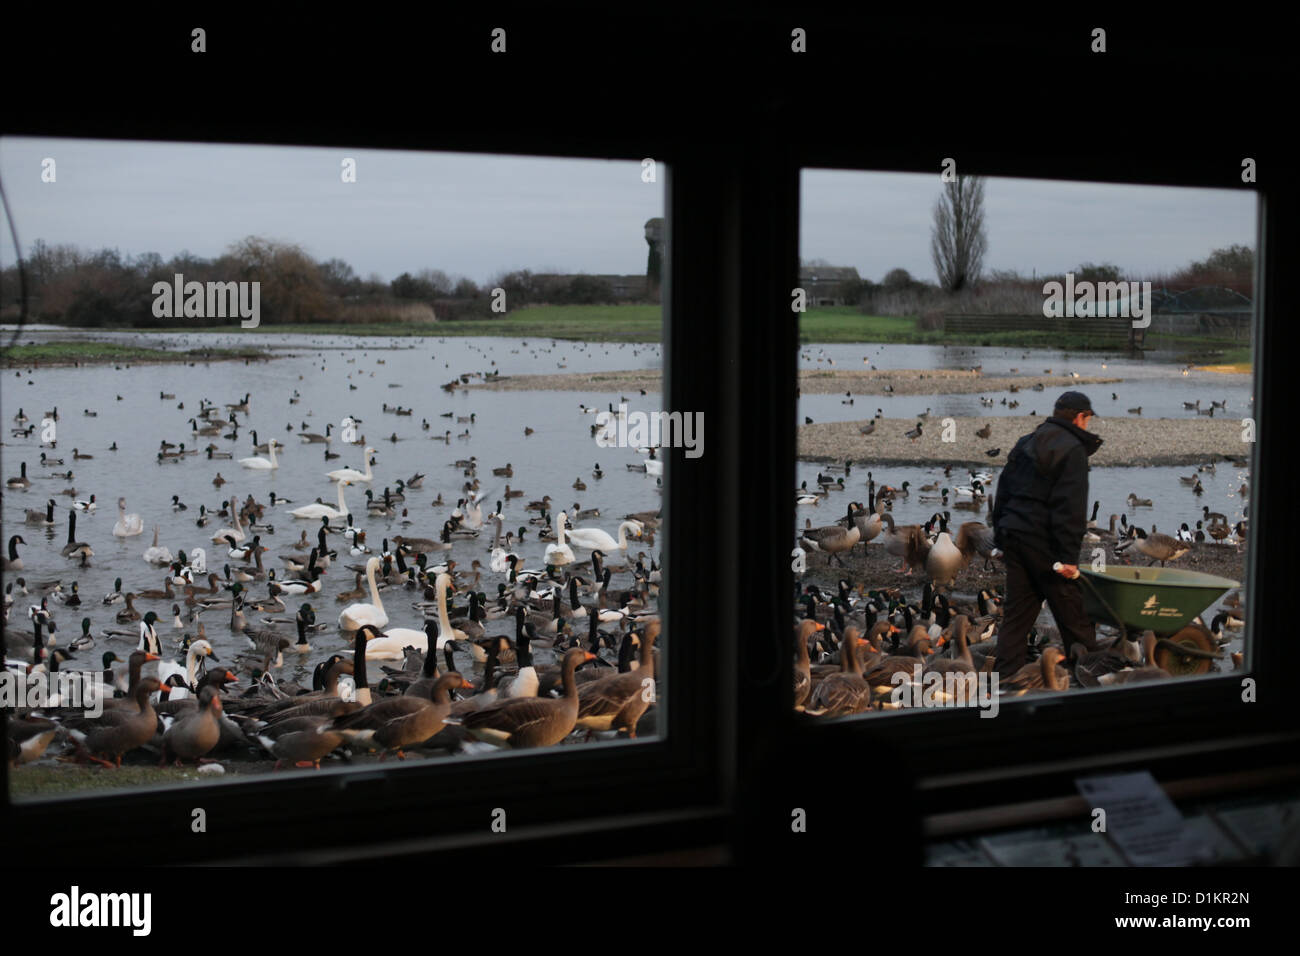 WWT Slimbridge Wetland Centre, Gloucestershire, UK. Pictured - A WWT member of staff puts out feed for birds Stock Photo